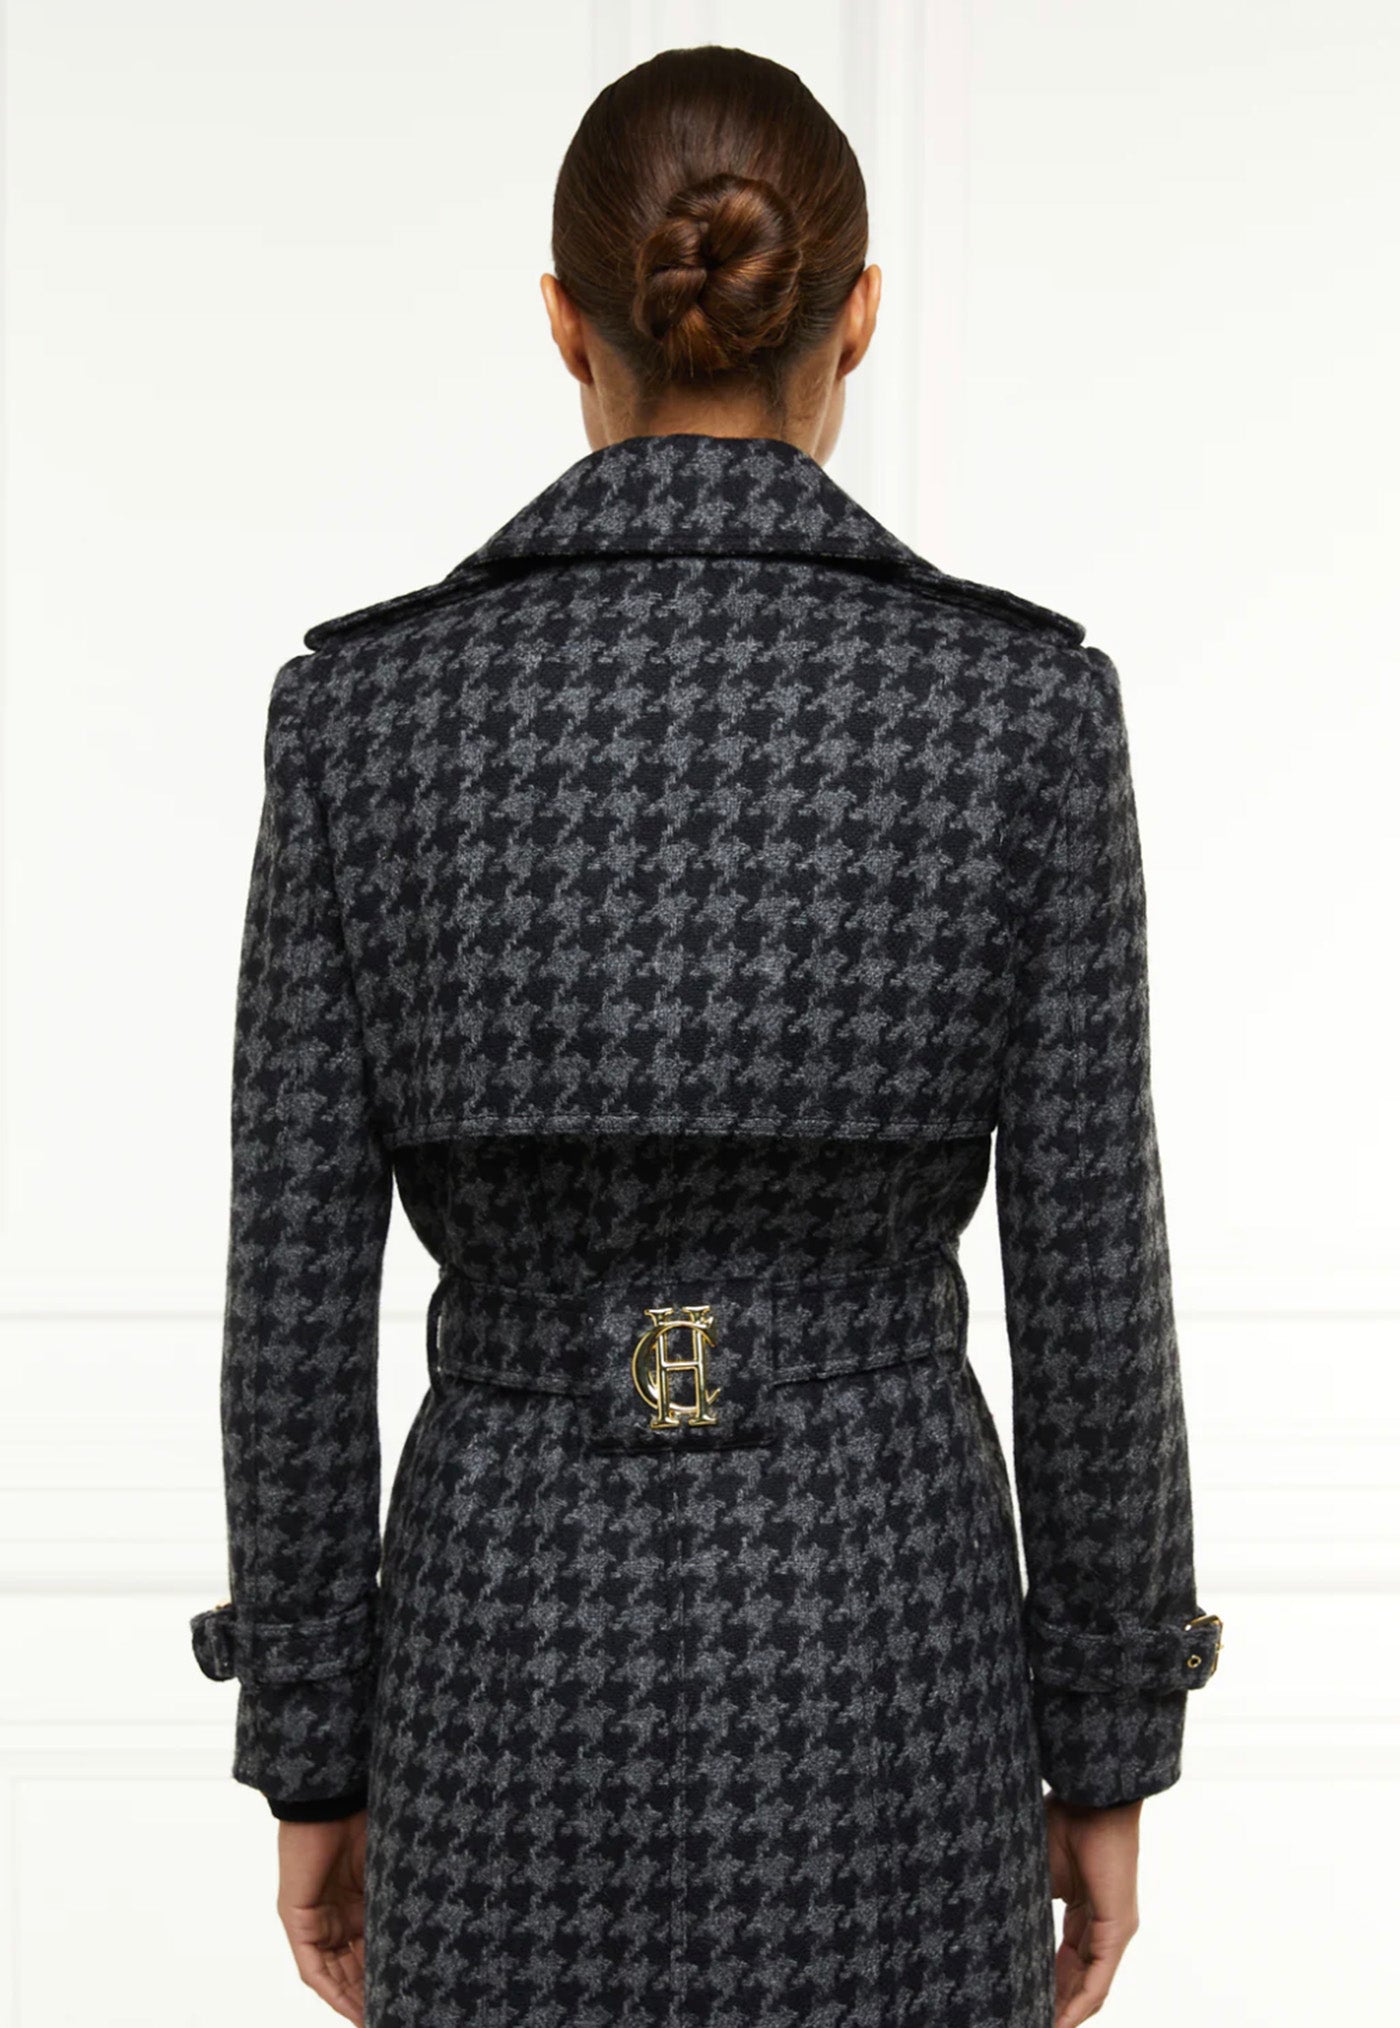 Chelsea Trench Coat Full Length - Charcoal Houndstooth sold by Angel Divine